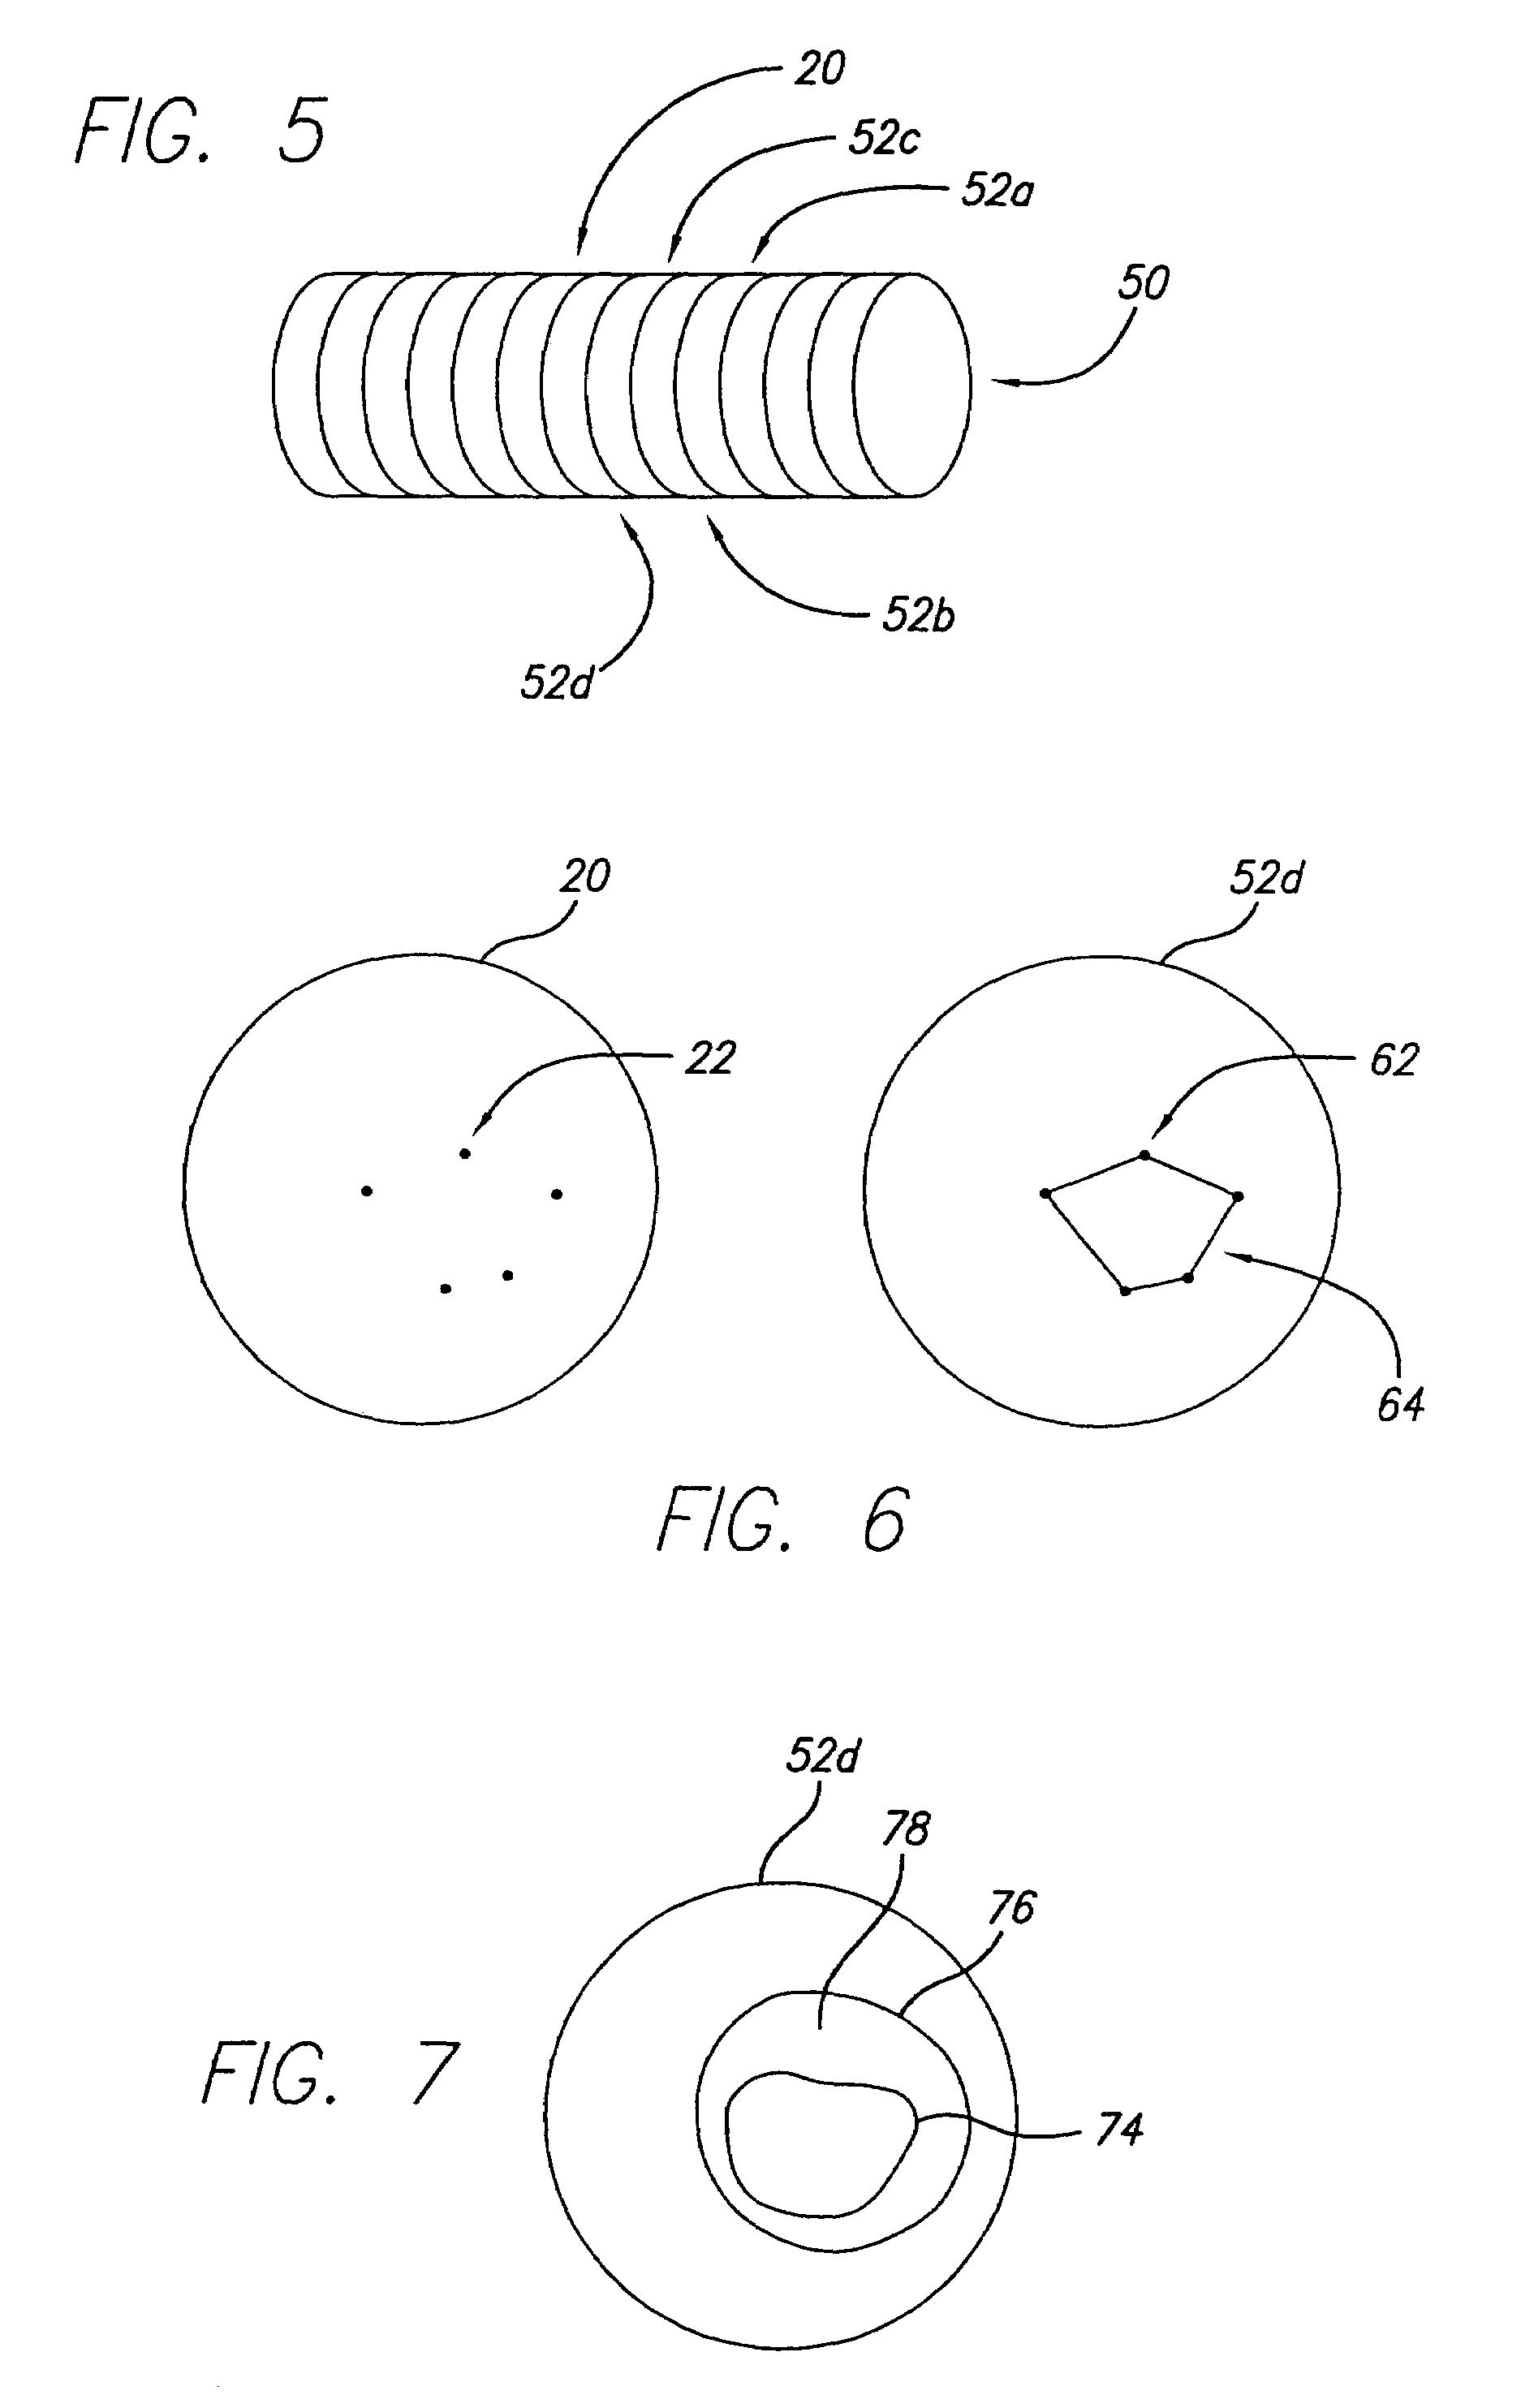 System and method for identifying a vascular border